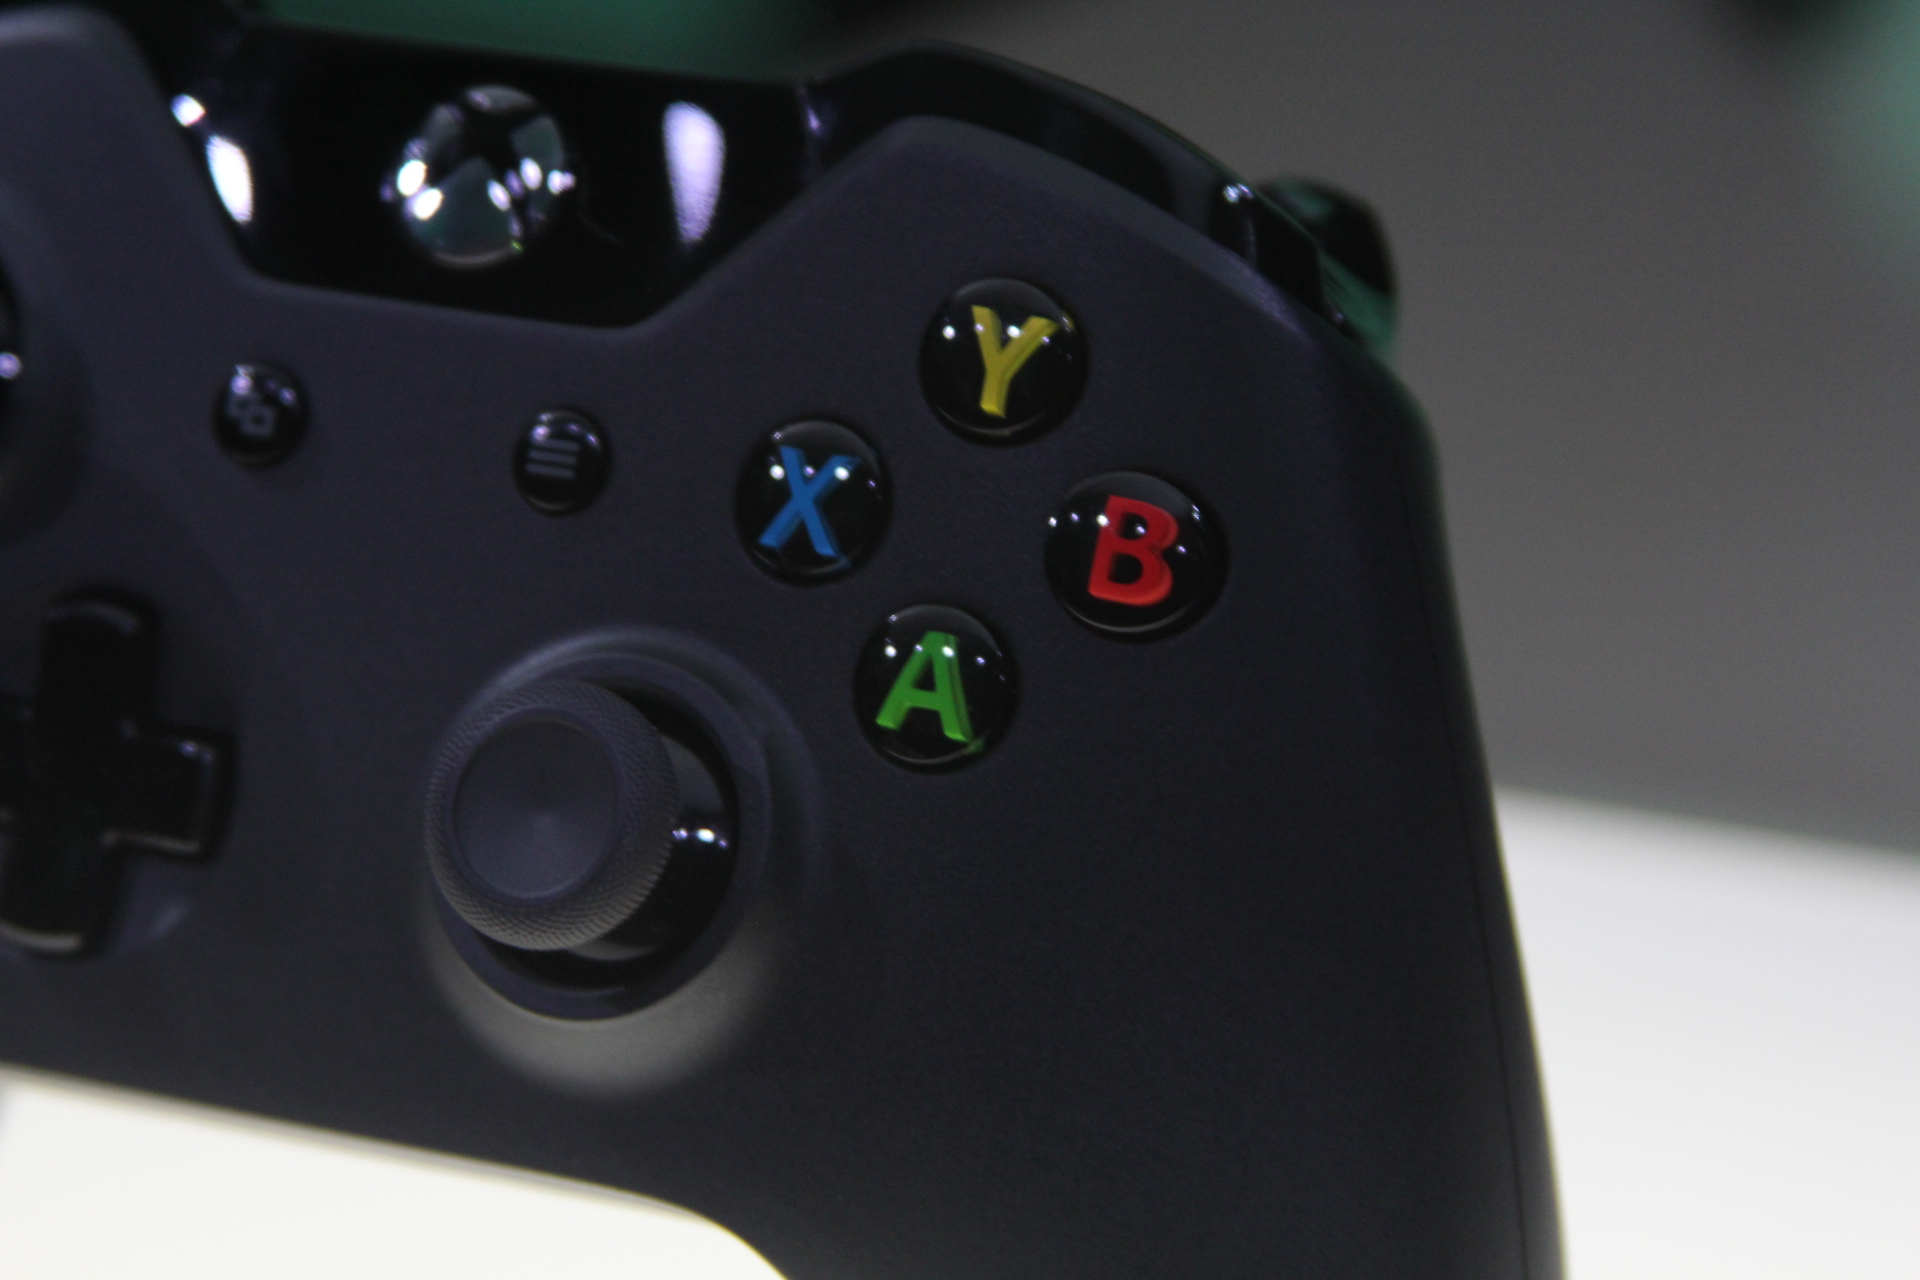 Eyes on the Xbox One: An edgy beast with a new controller and Kinect sensor1920 x 1280